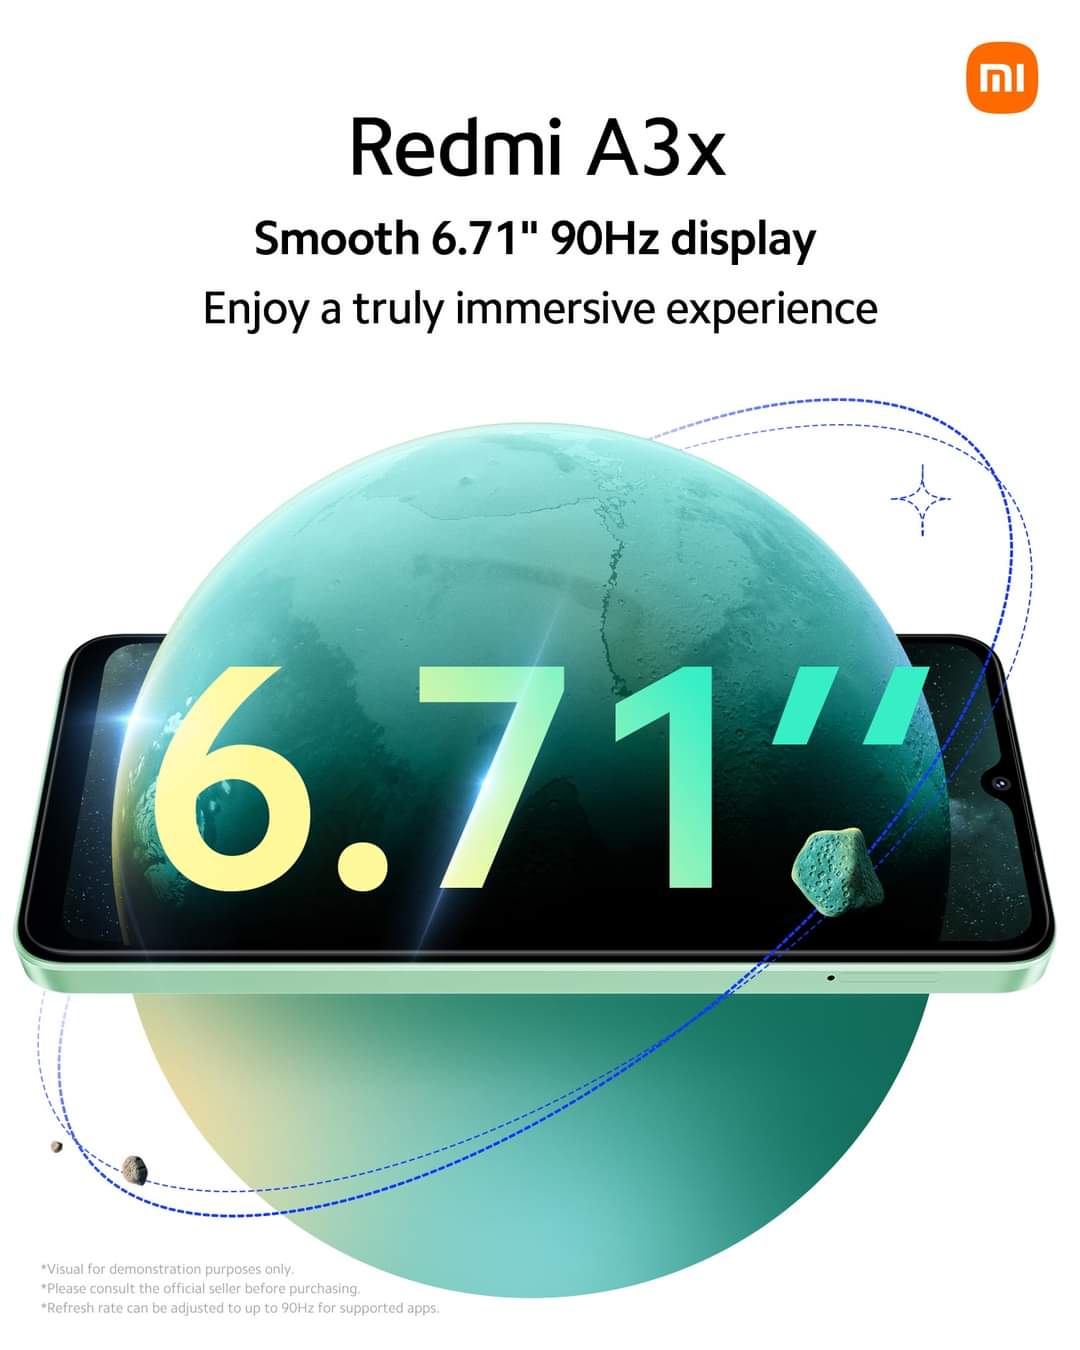 Elegant: Redmi A3x featuring a Jaw-Dropping Glass Back & Lightning-Fast 6.71” 90Hz Display launched by Xiaomi in Nairobi